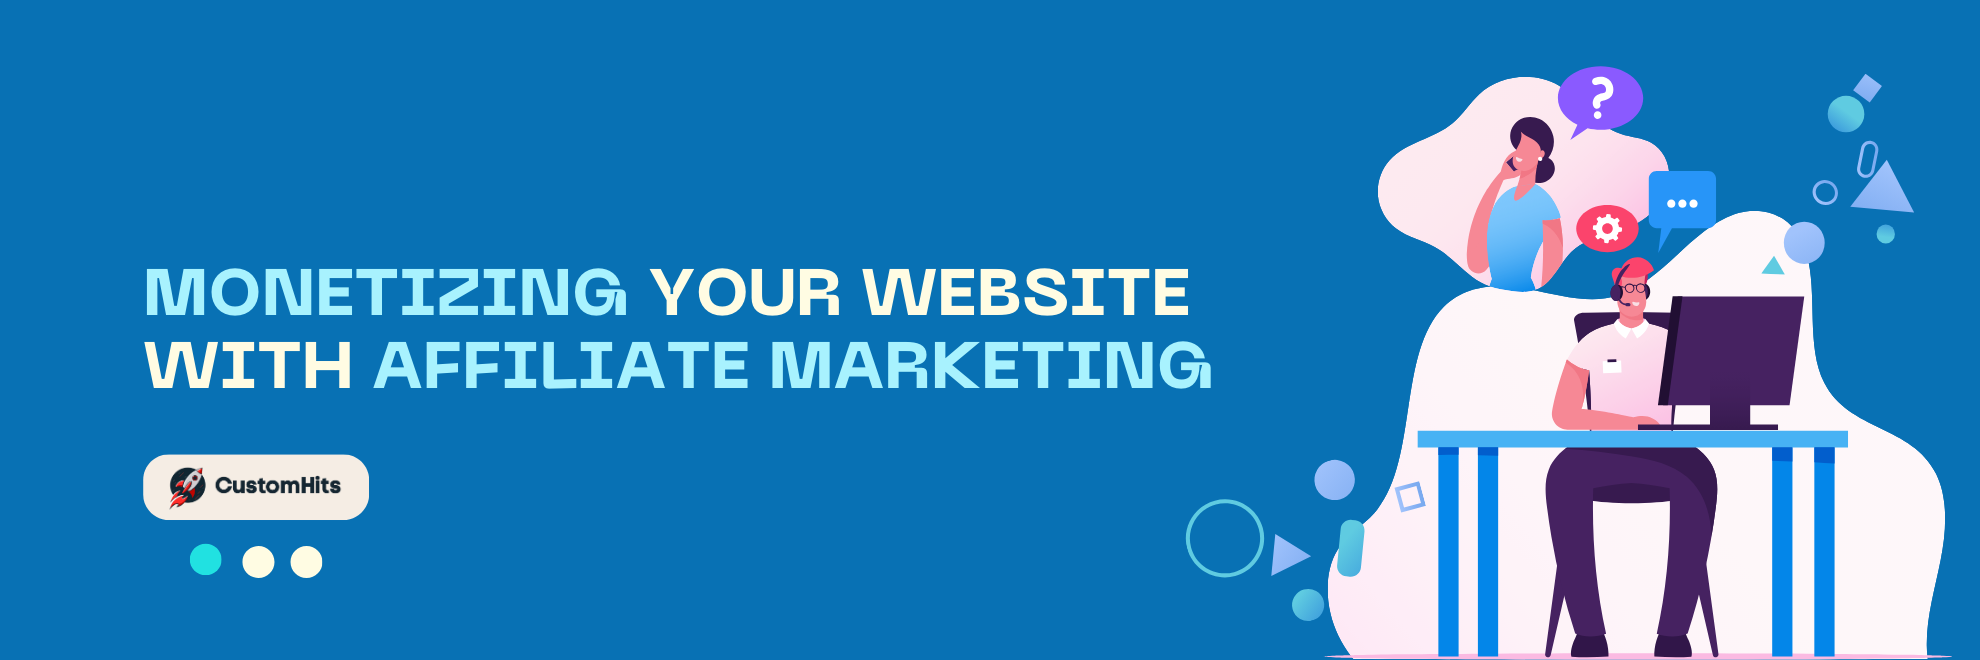 Monetizing Your Website with Affiliate Marketing